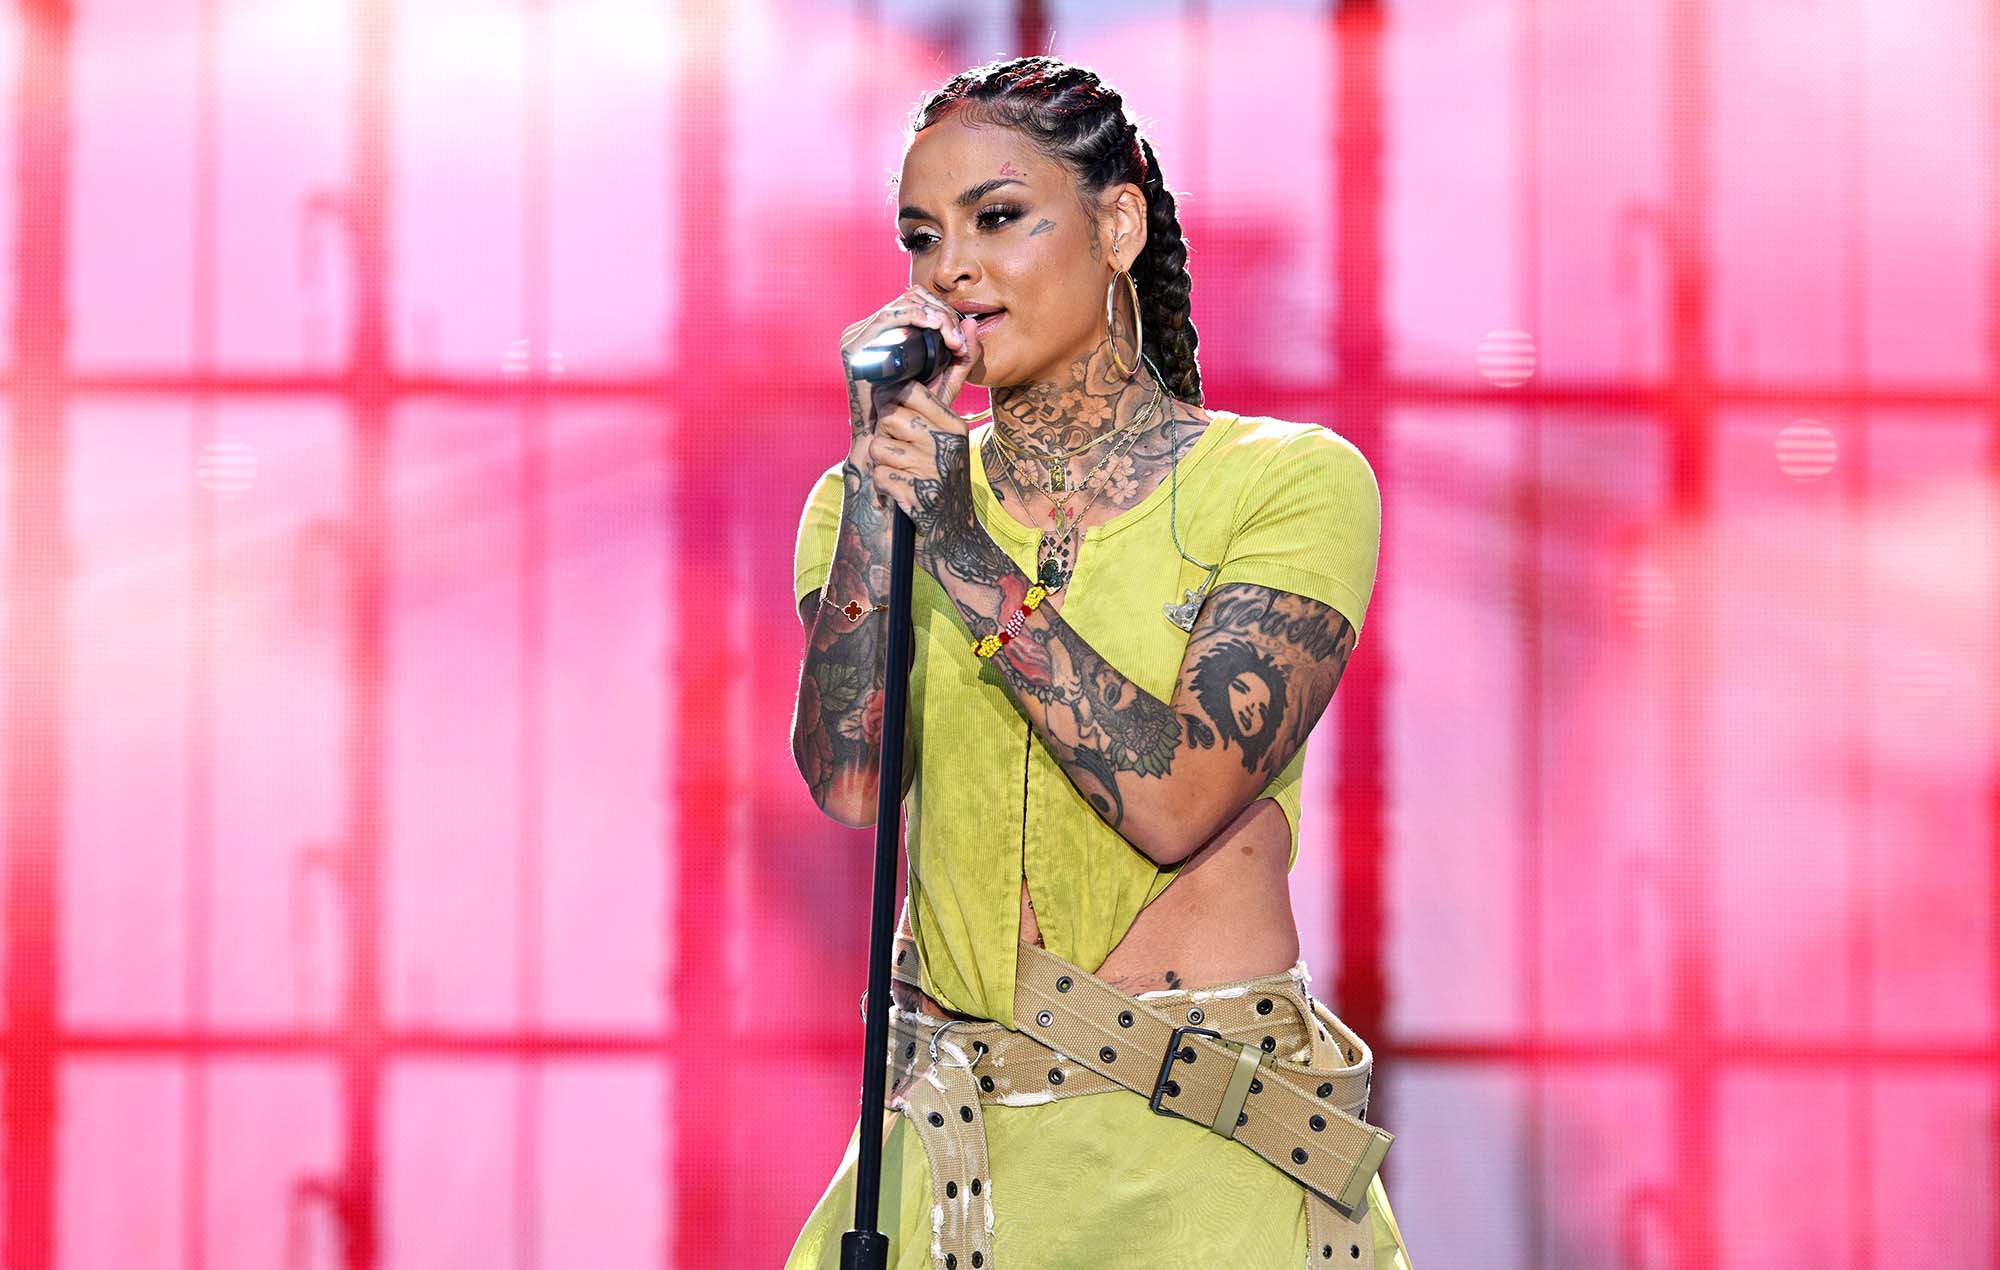 Kehlani on fan reaction to ‘Blue Water Road’: “They can tell I’m in a better place just from the music”